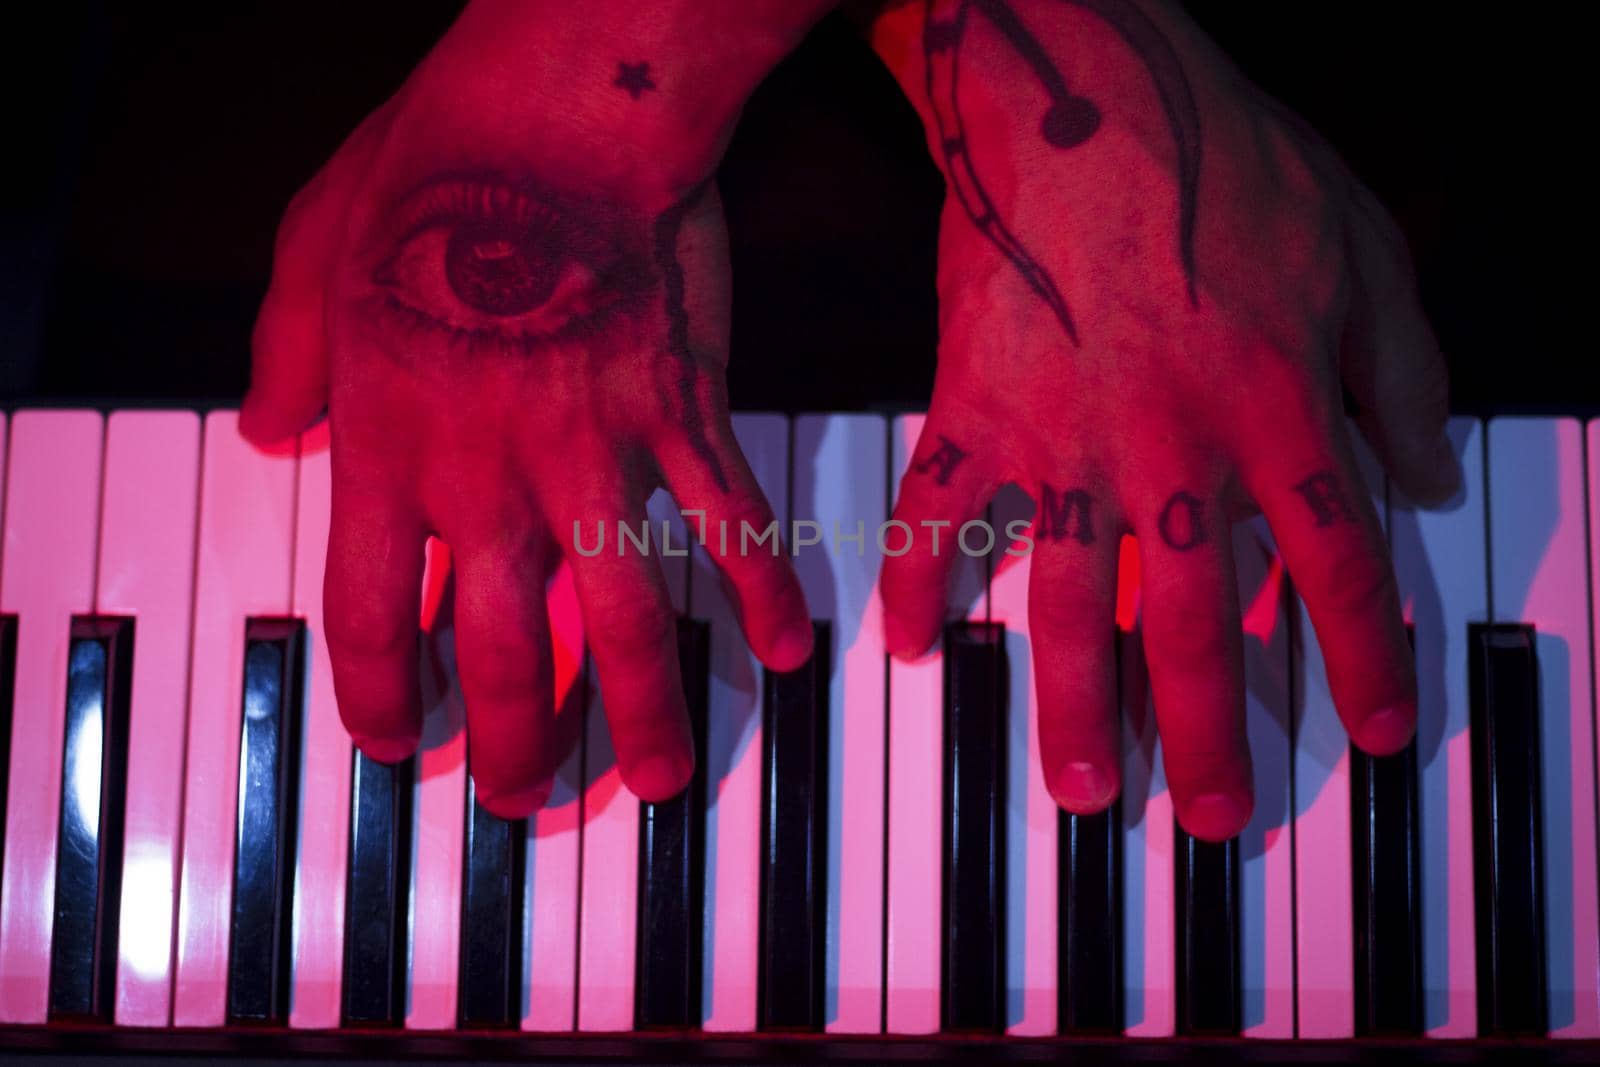 Tattooed mans hands on the keyboard of a piano. Dark background